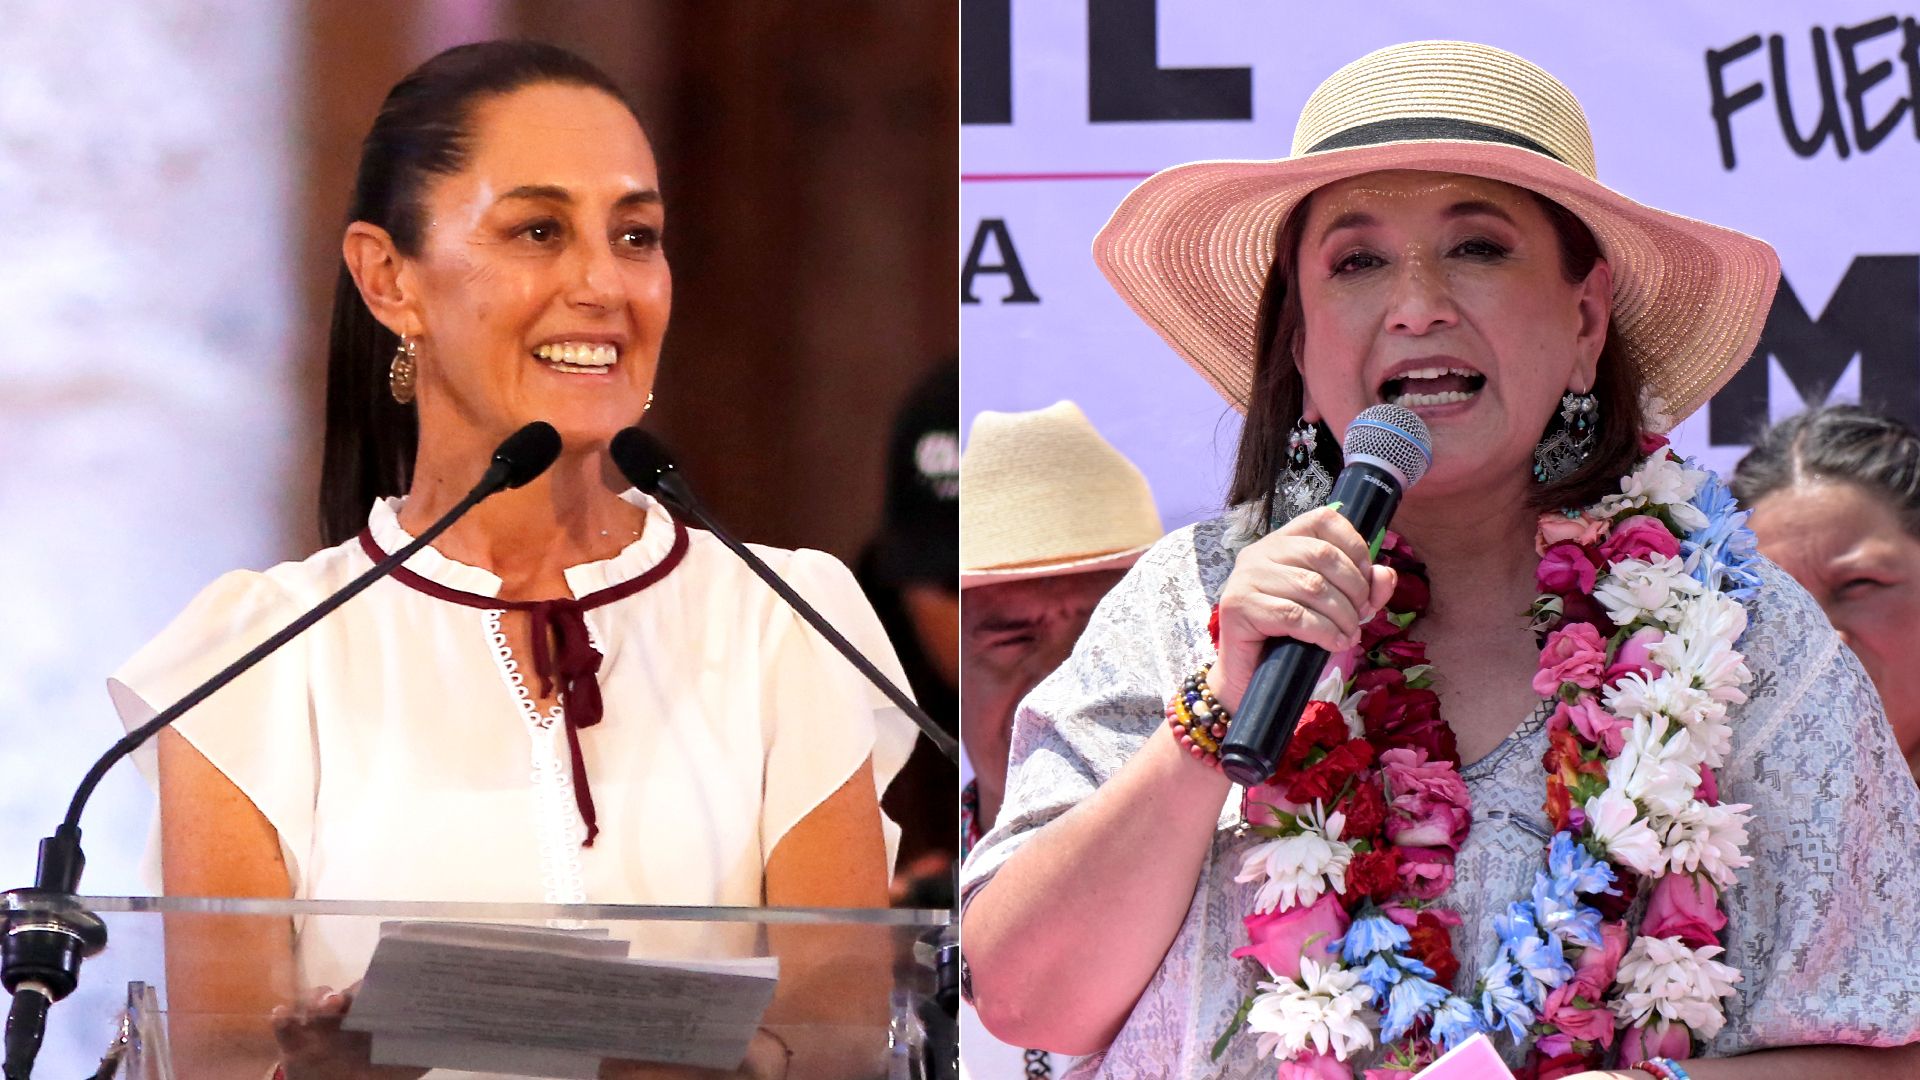 Two side-by-side photos show Mexican presidential candidates Claudia Sheinbaum and Xóchitl Gálvez